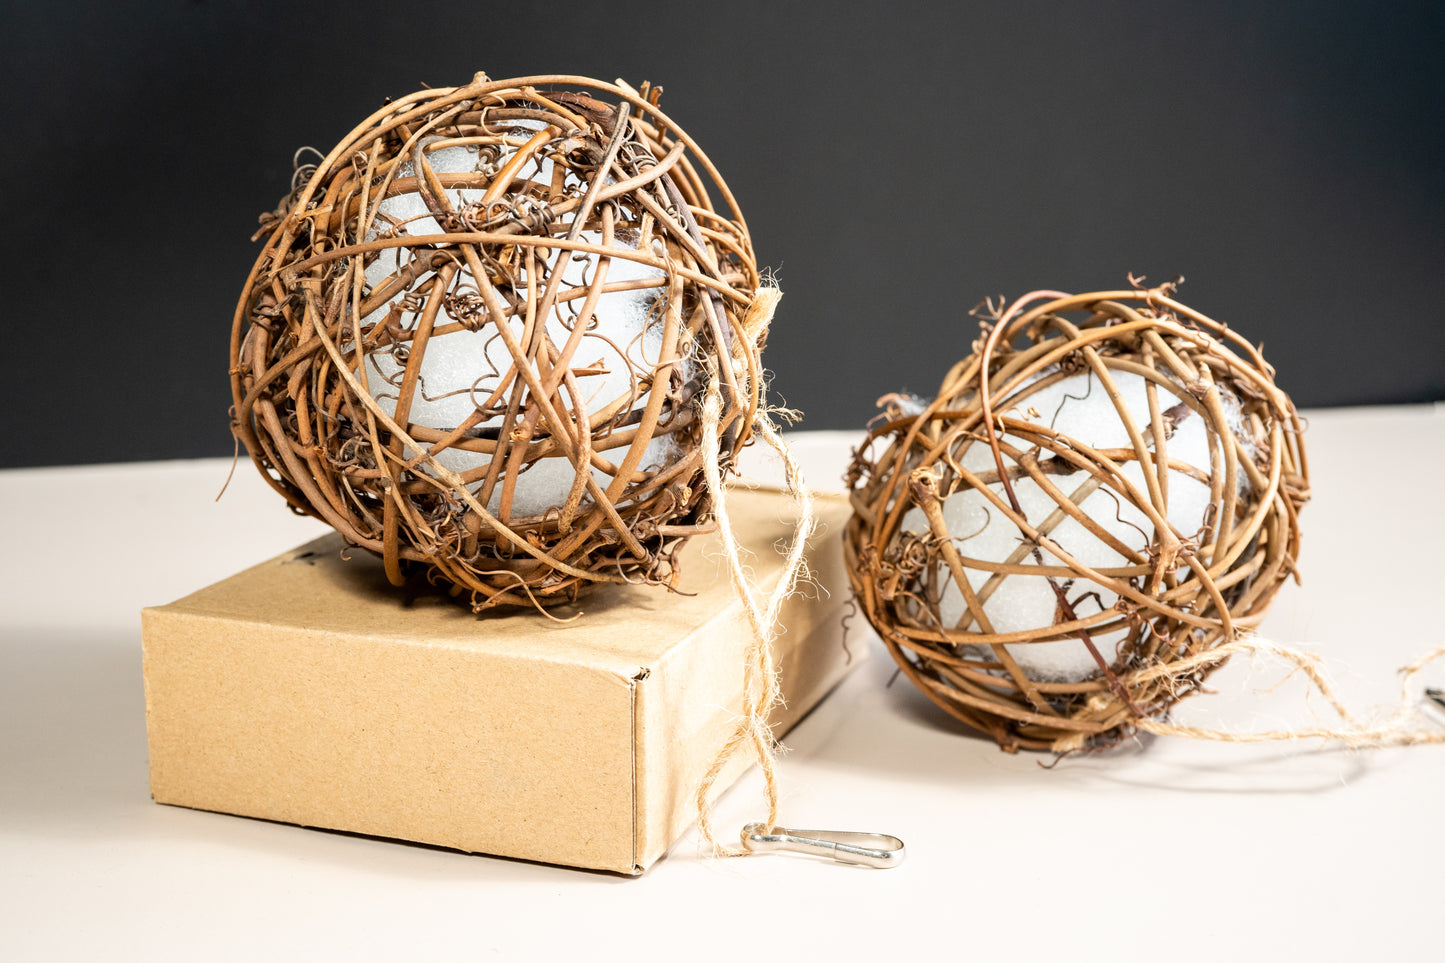 Pet bird toy, rattan ball with foam inside and hanging.